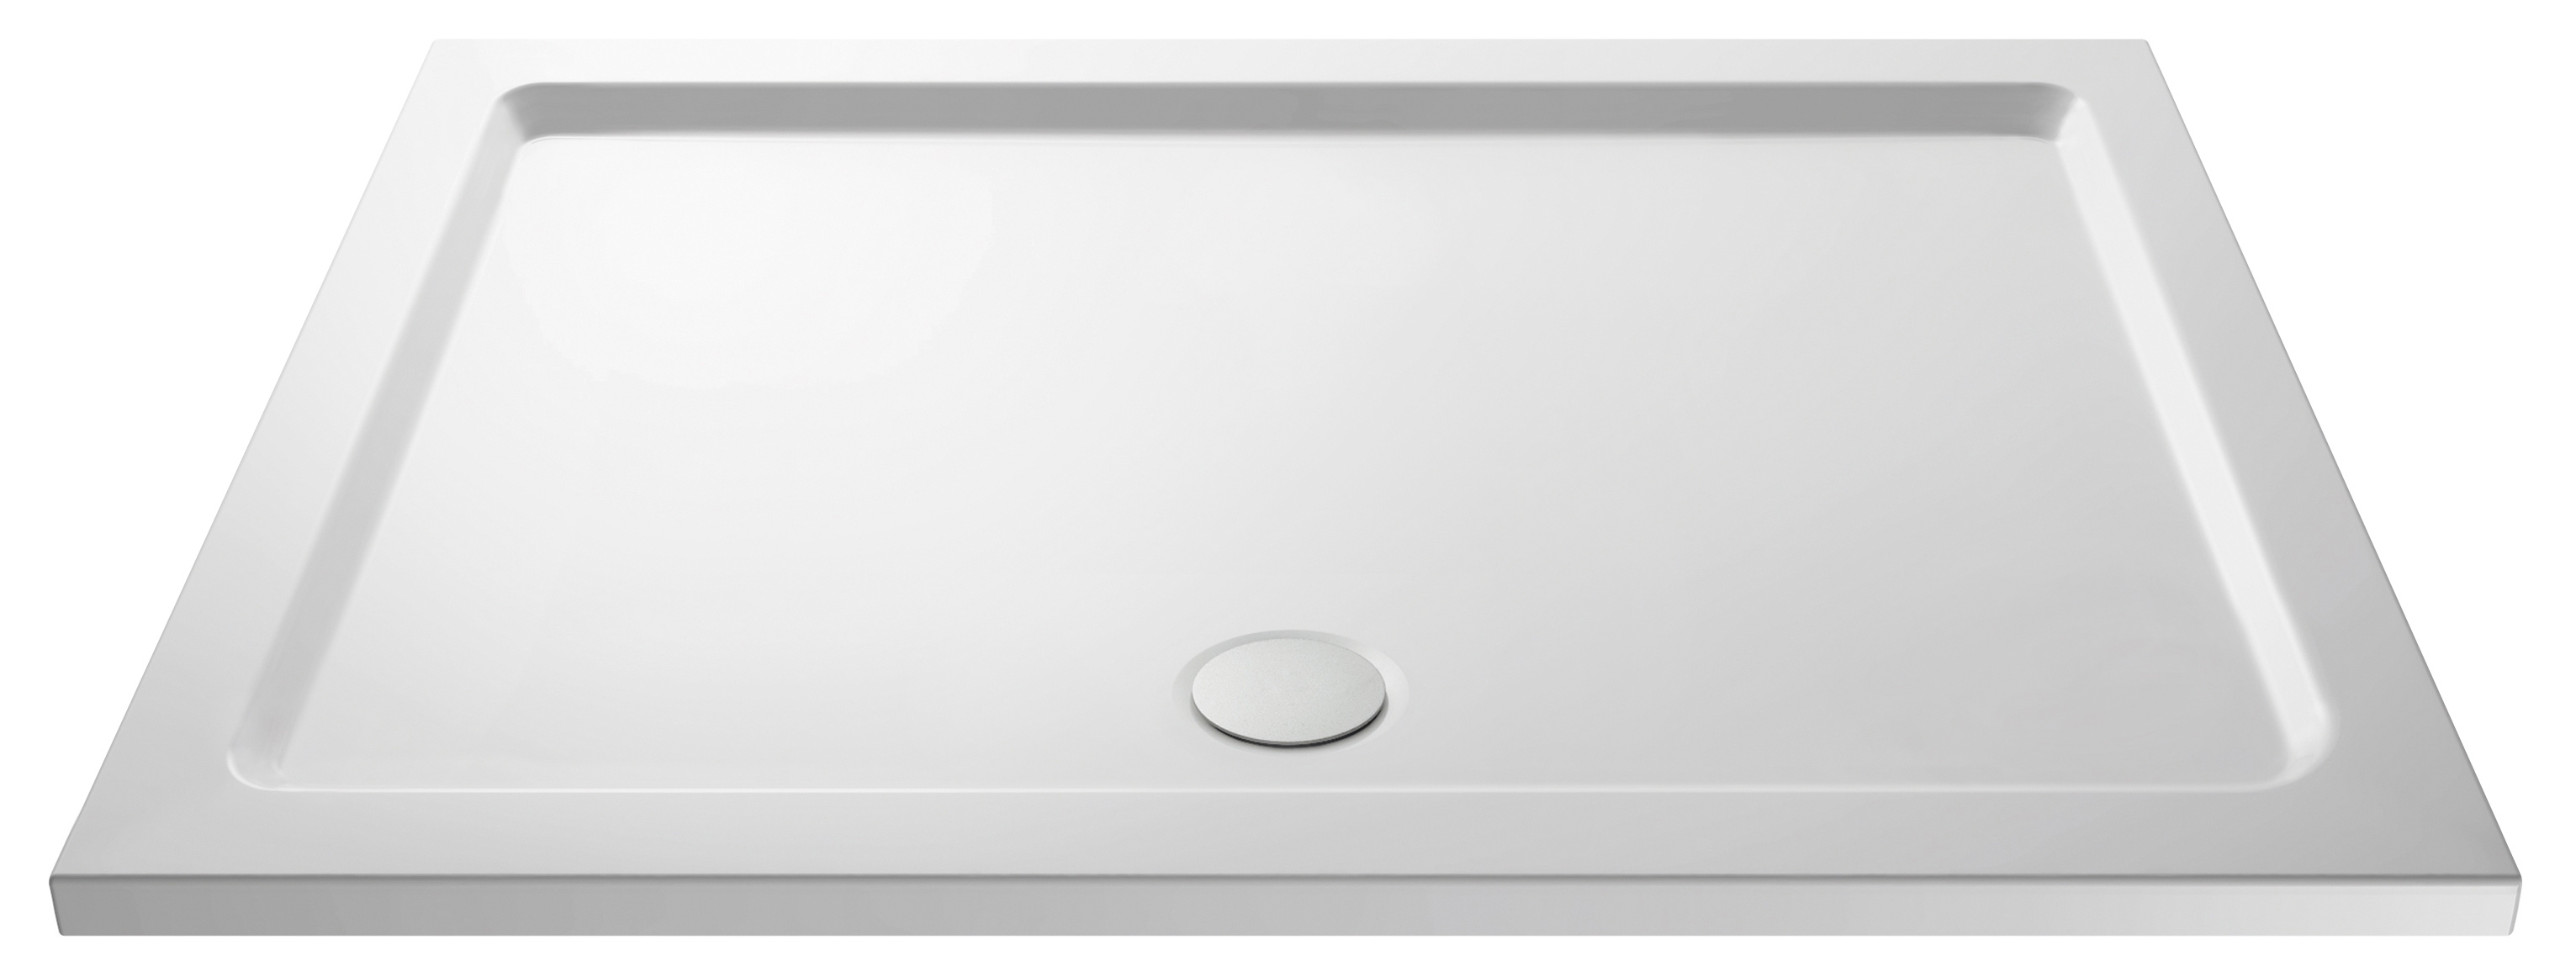 Nuie Shower Tray Pearlstone Rectangular 1700mm x 900mm - White - NTP064 